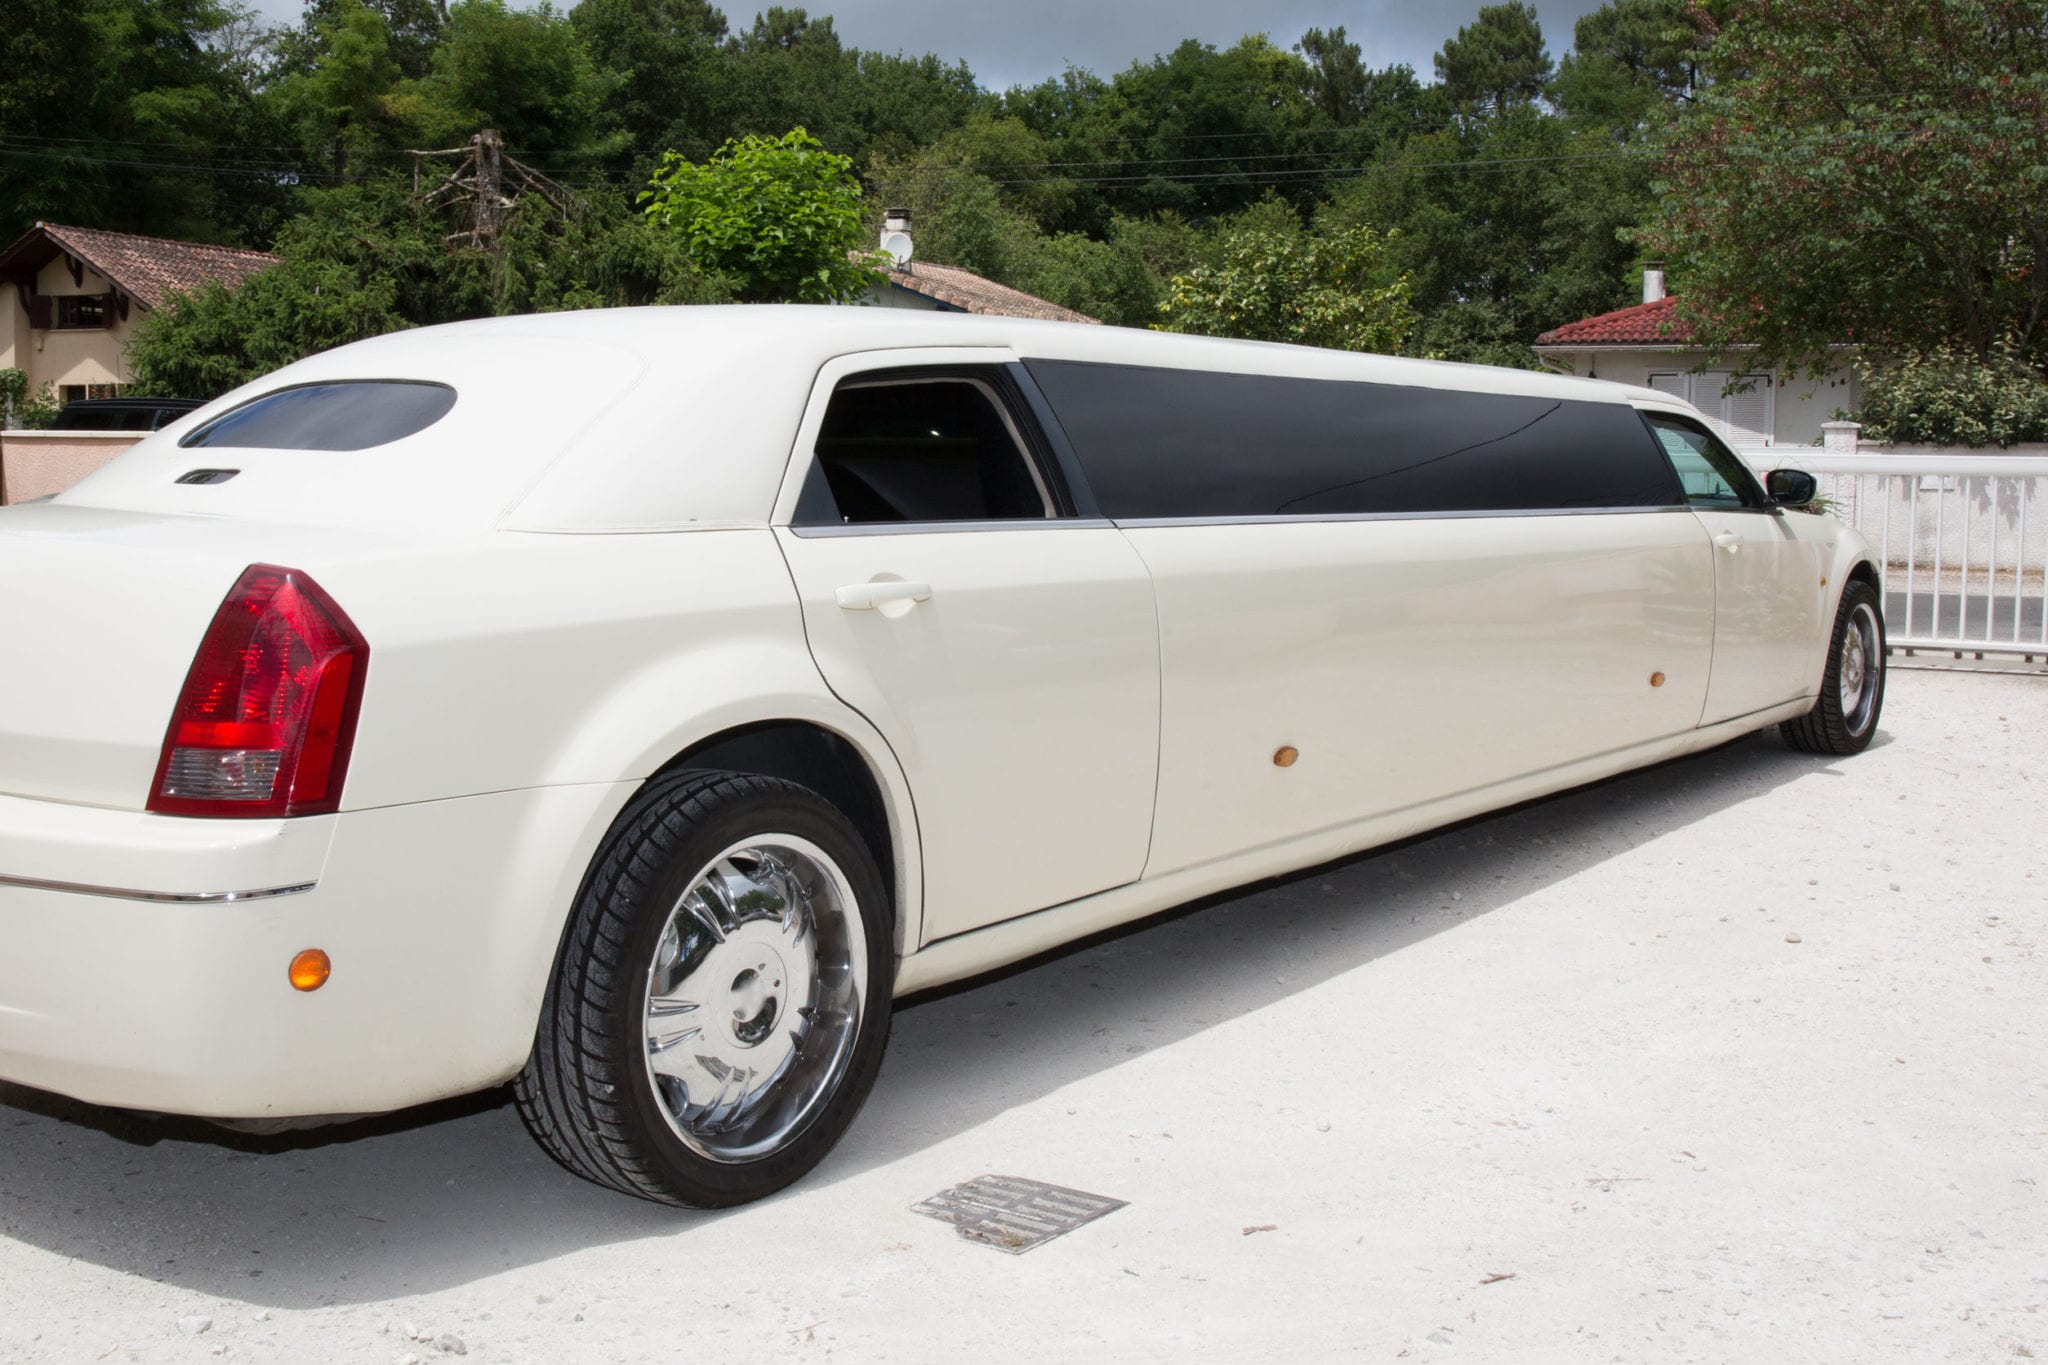 NYE Limo Wreck Your Evening? Filing a FL Injury Claim Won’t Be Easy